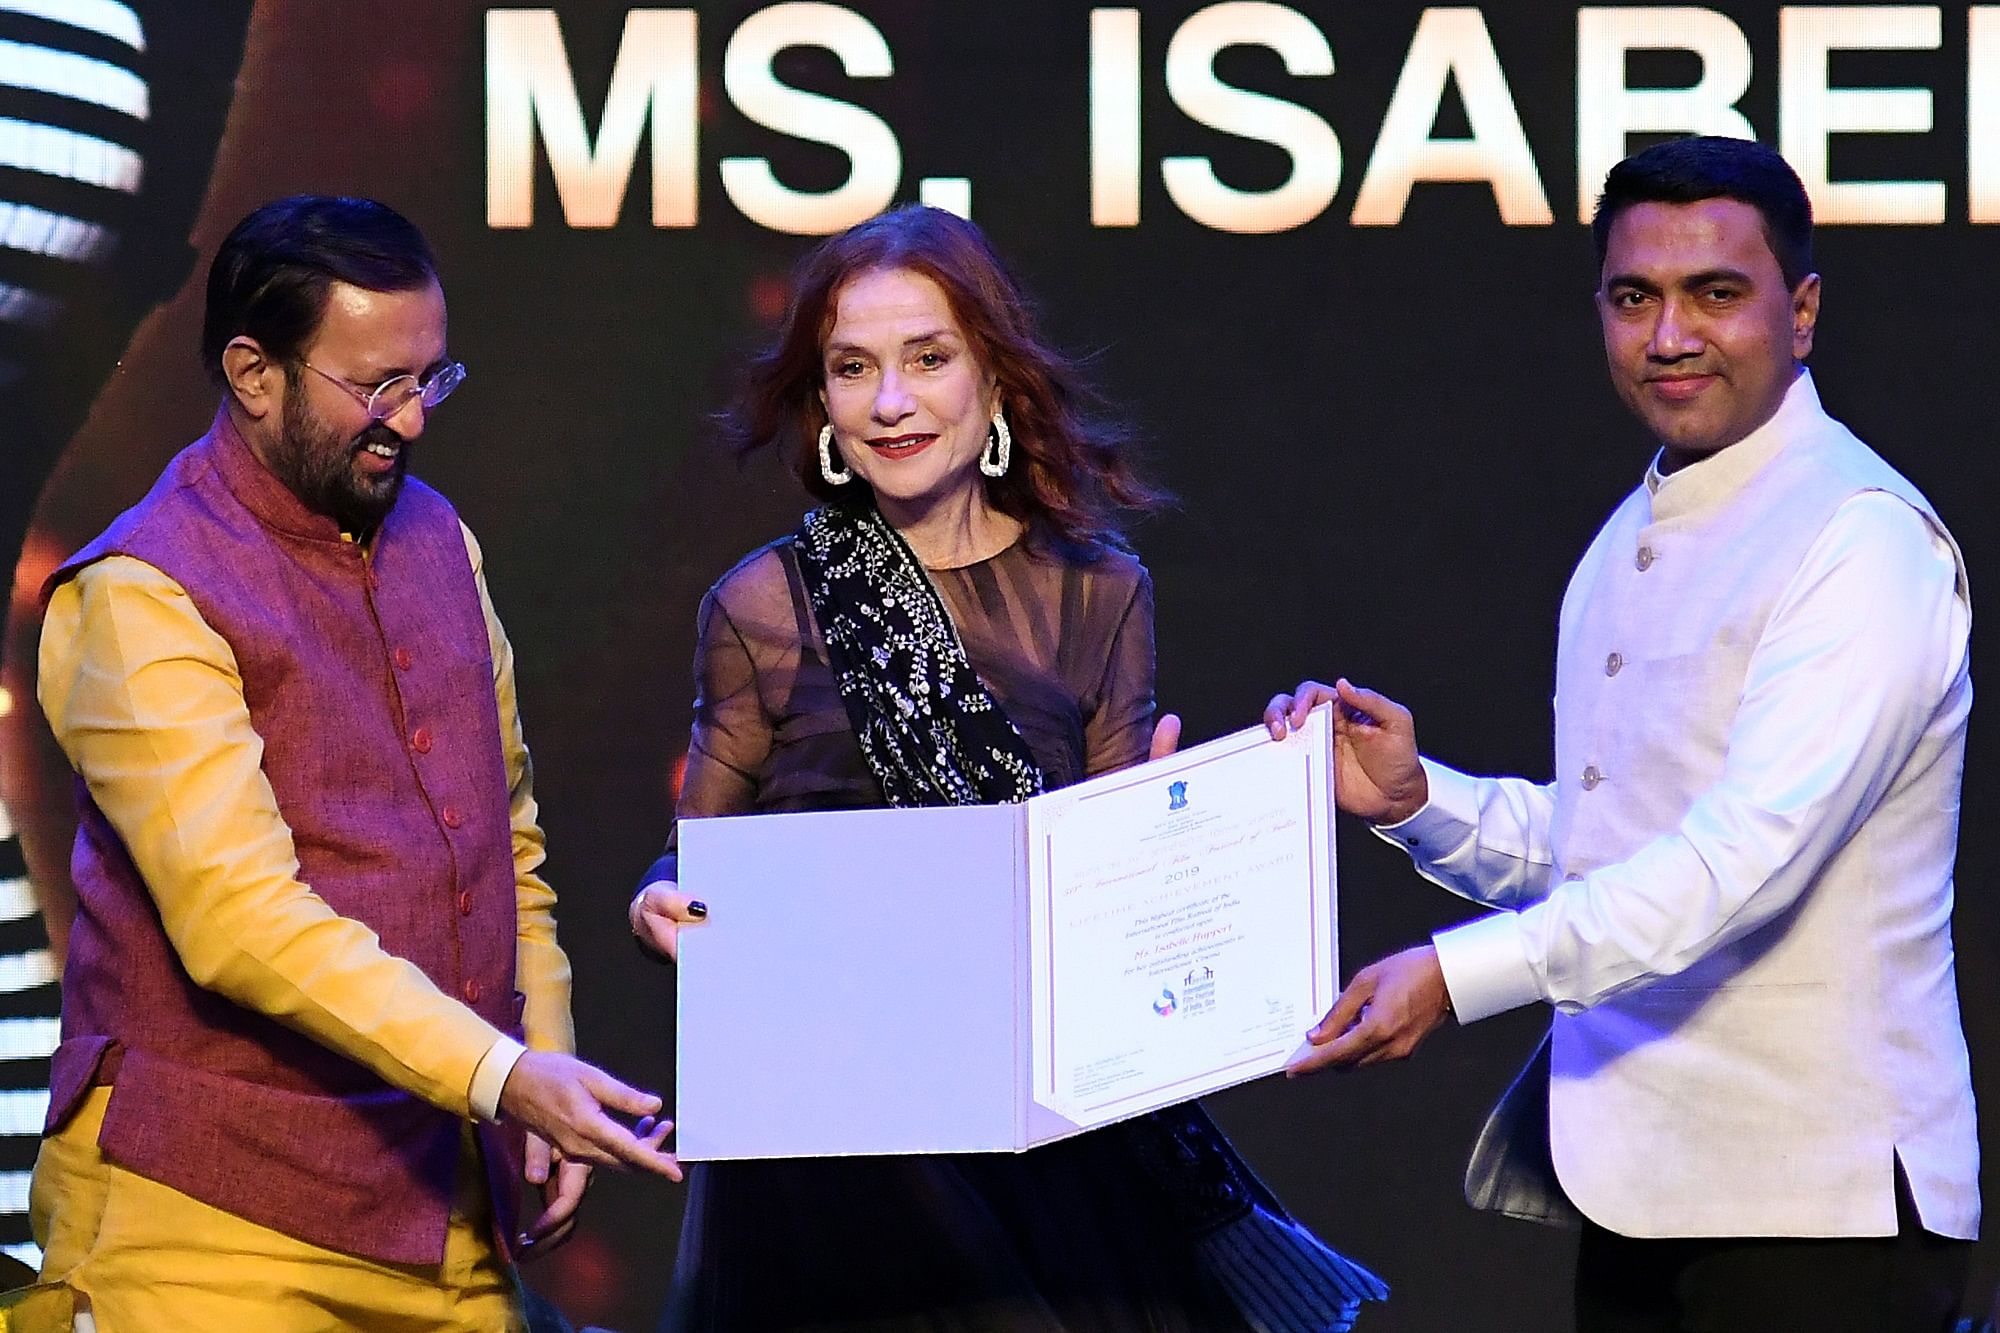 Isabelle Huppert was conferred the Lifetime Achievement Award at IFFI Goa this year. DH PHOTO BY PUSHKAR V